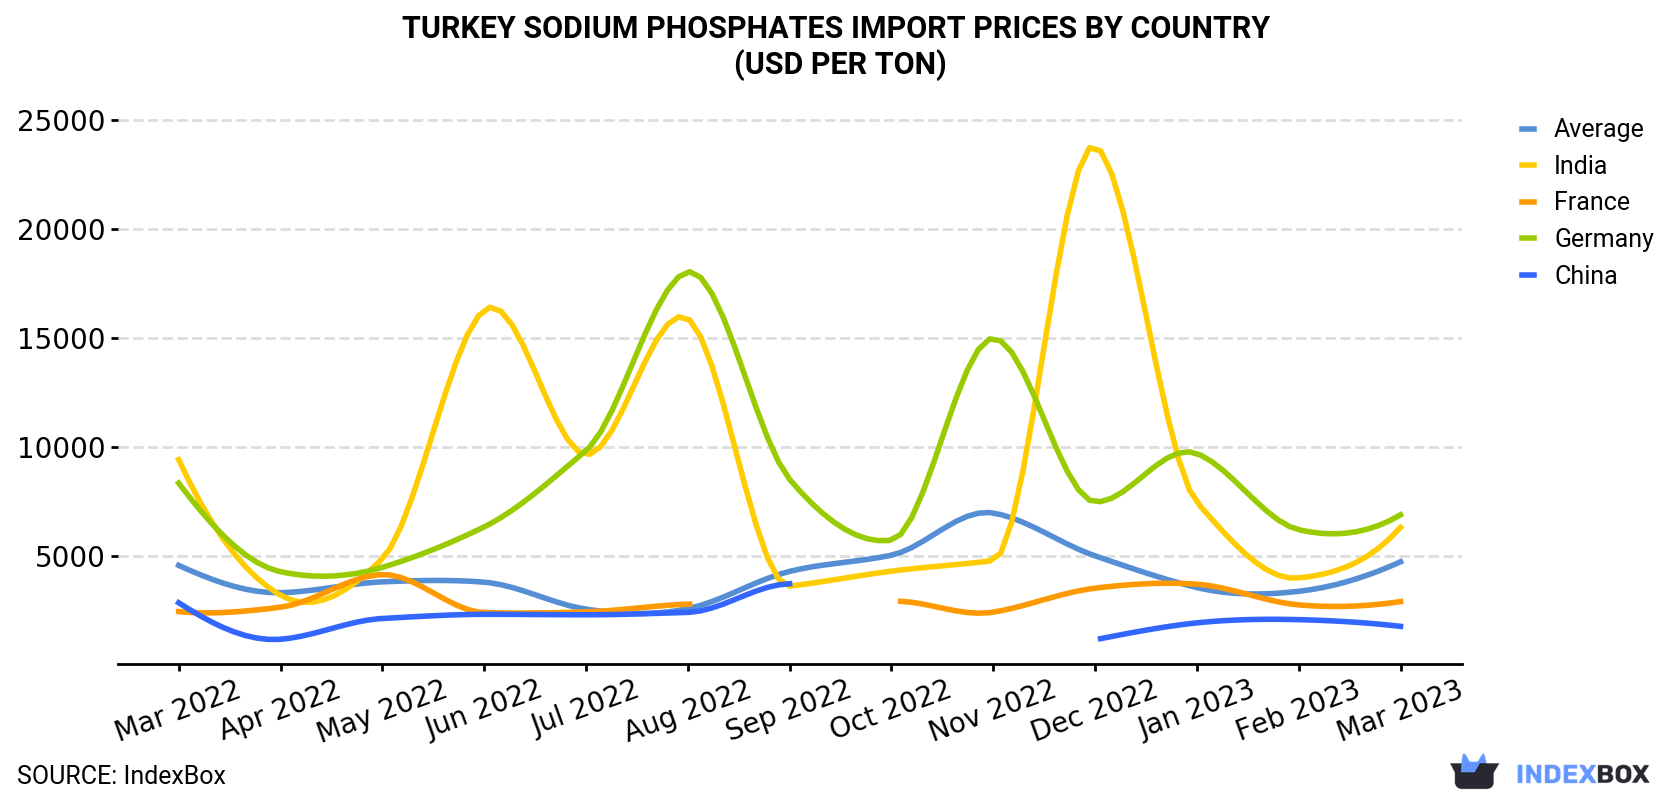 Turkey Sodium Phosphates Import Prices By Country (USD Per Ton)